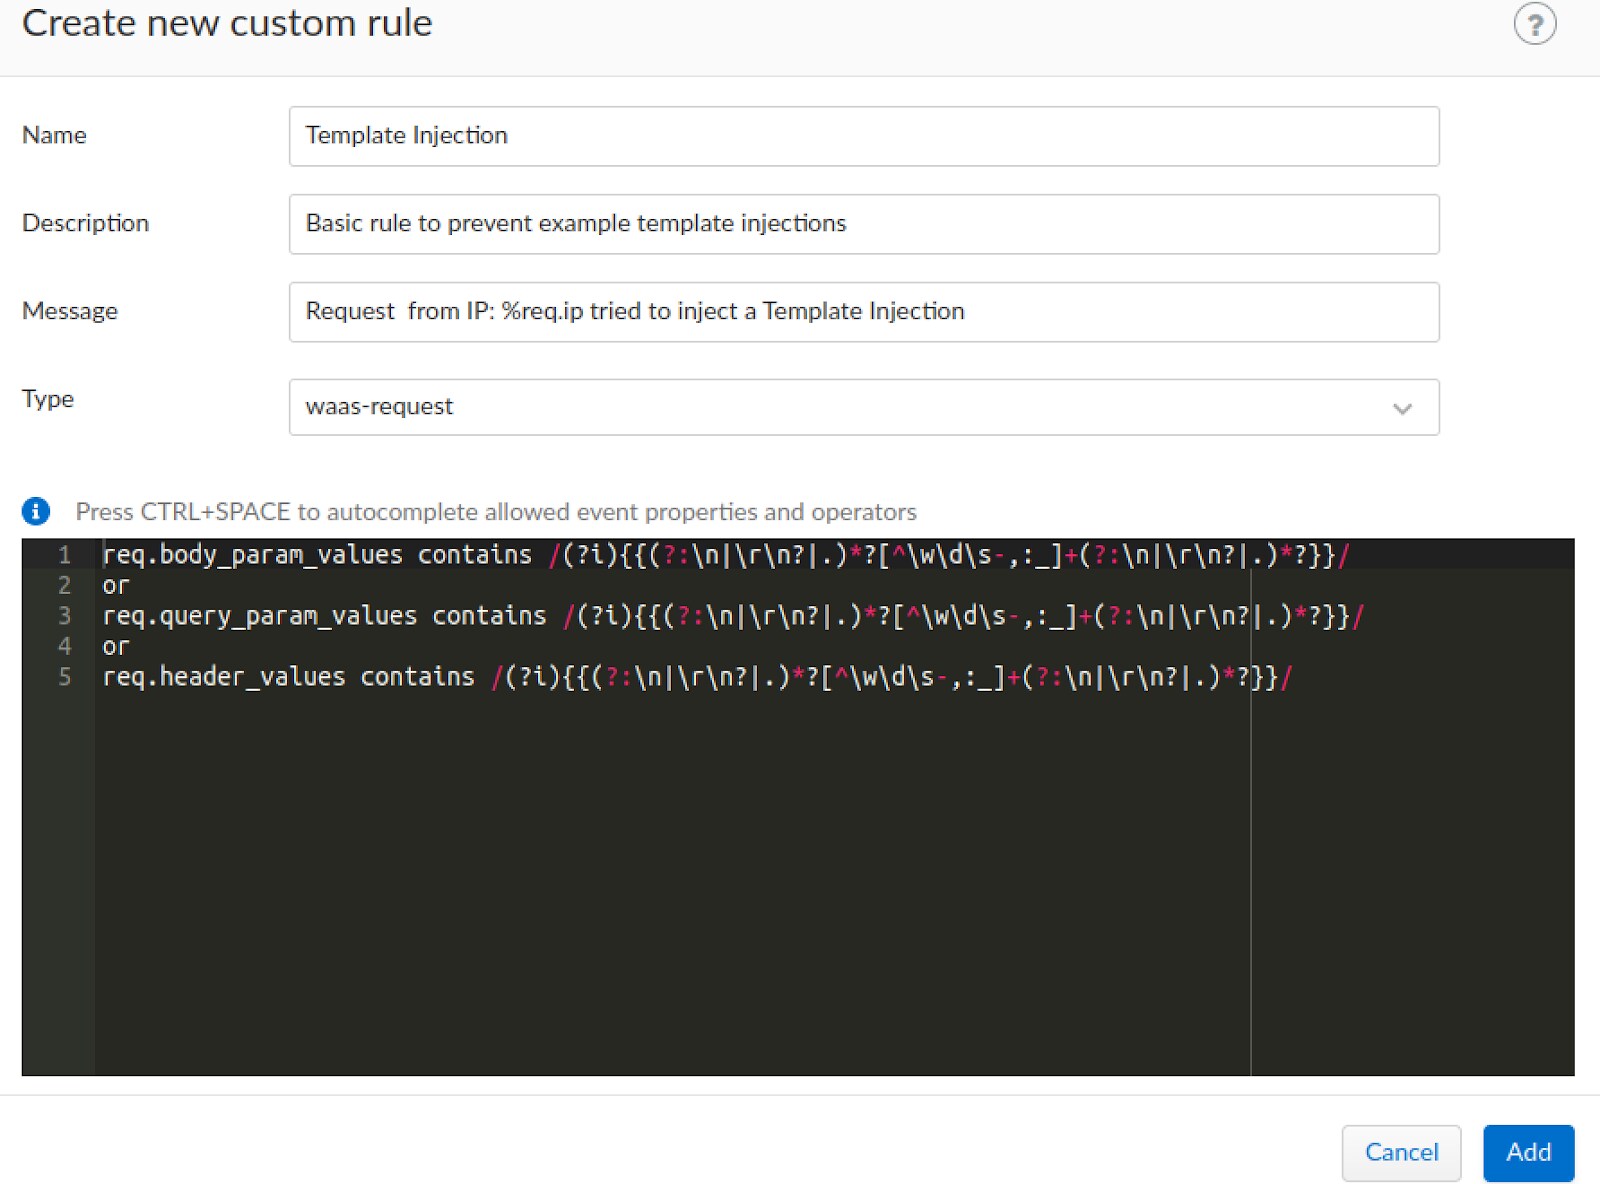 Figure 32. Creating a custom rule using the given regex